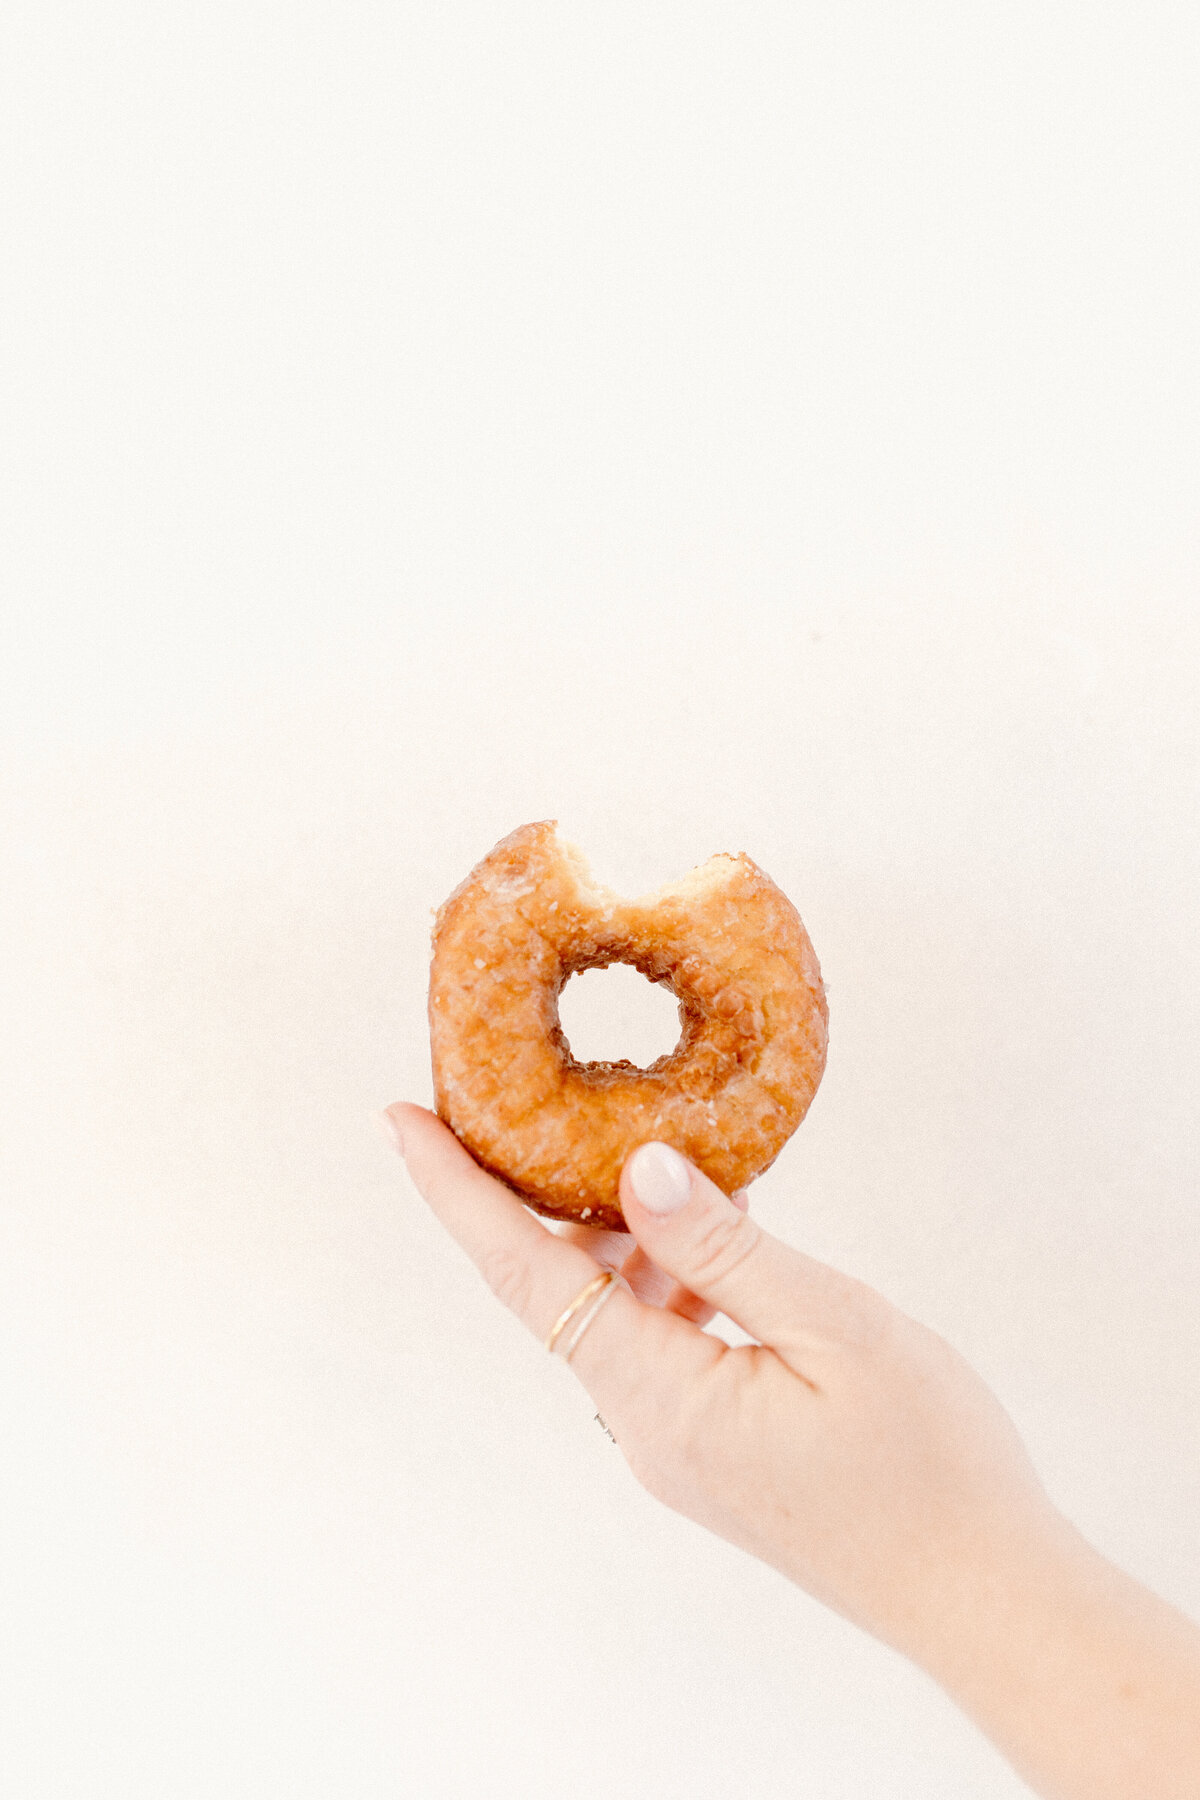 one bite donut in woman's hand